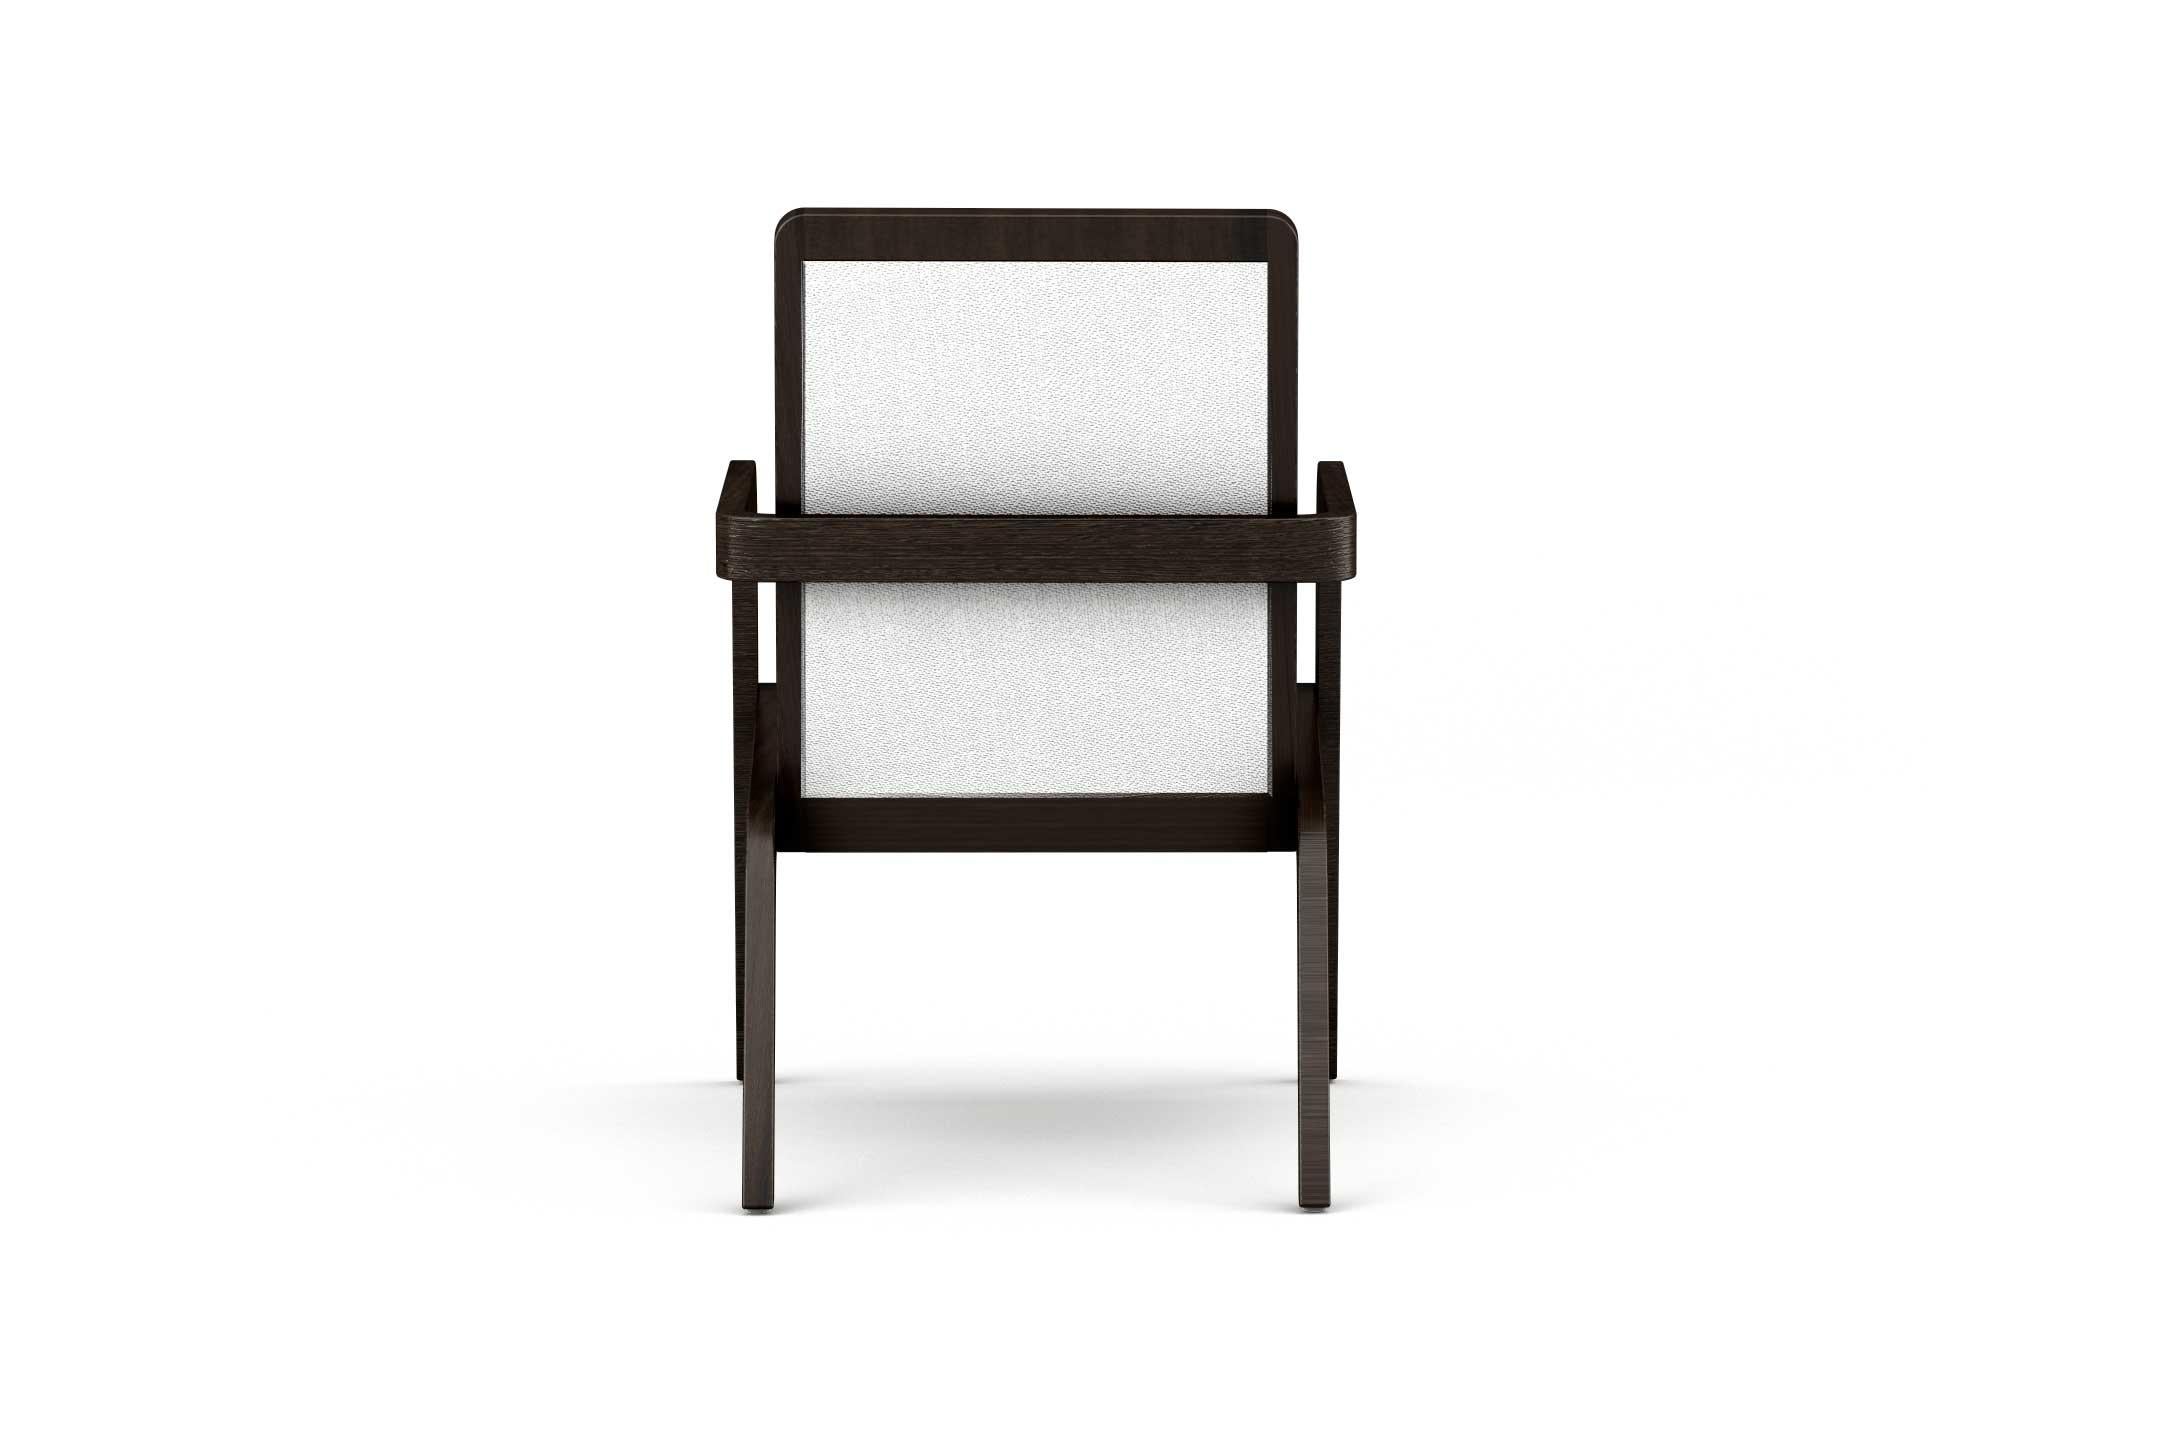 Stained Umbra Armchair, Modern and Minimalistic Black Armchair with Upholstered Seat For Sale